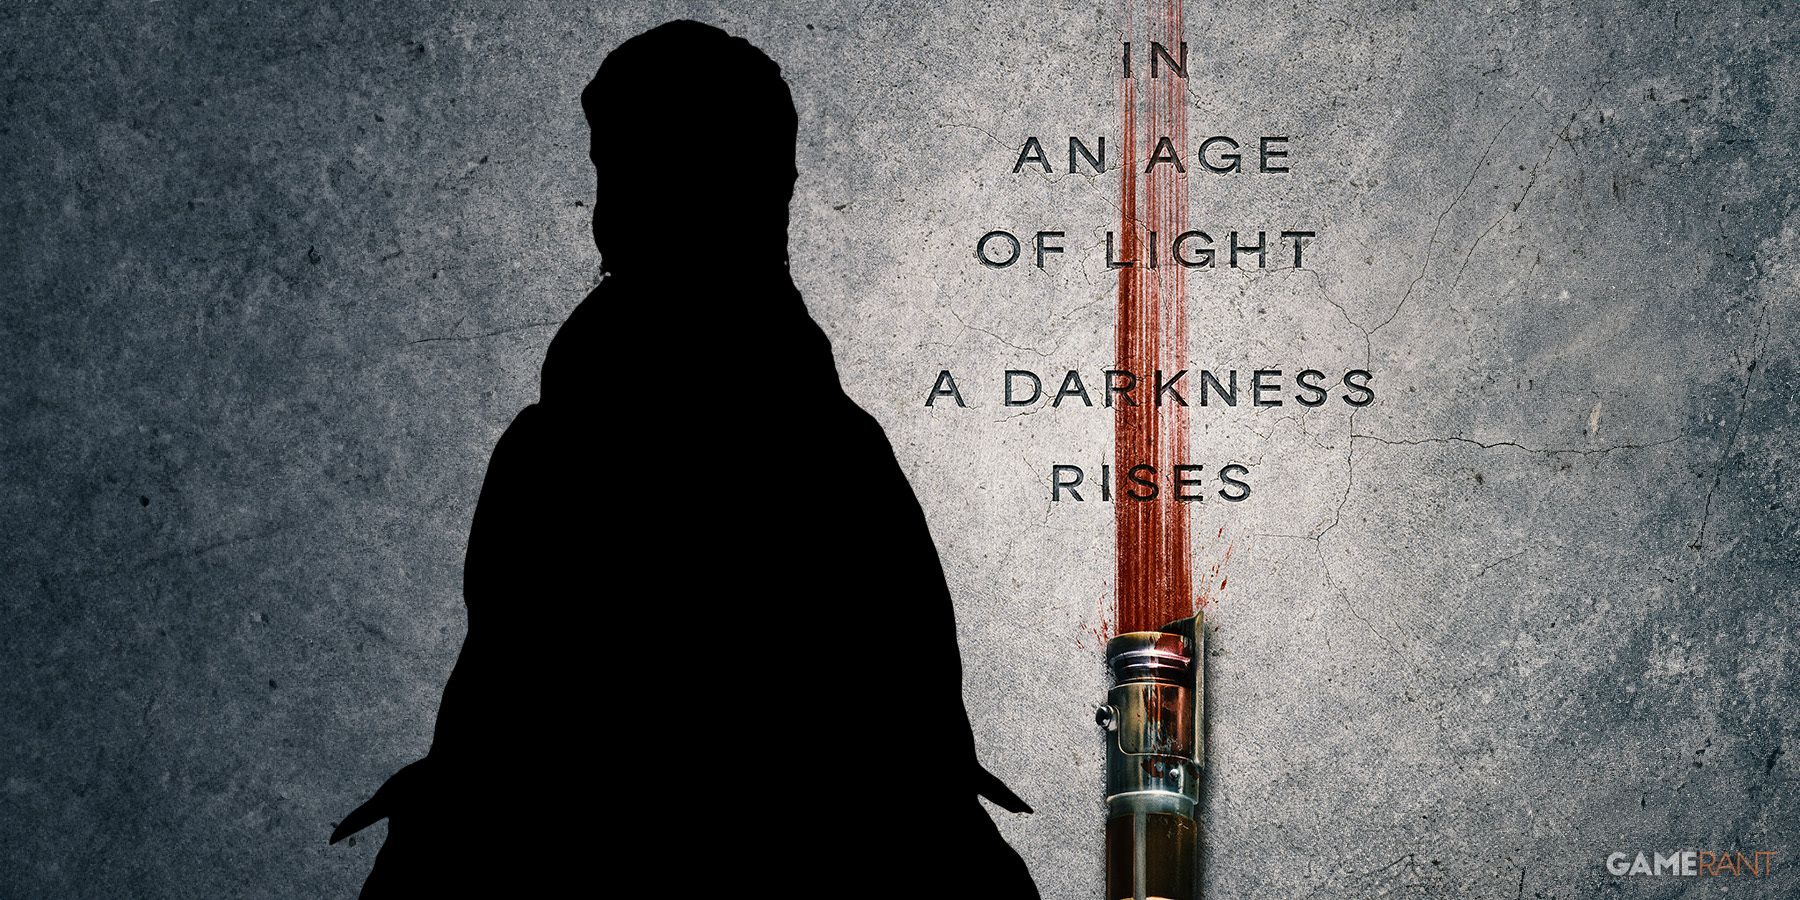 star-wars-the-acolyte-mother-aniseya-jodie-turner-smith-silhouette-game-rant-2